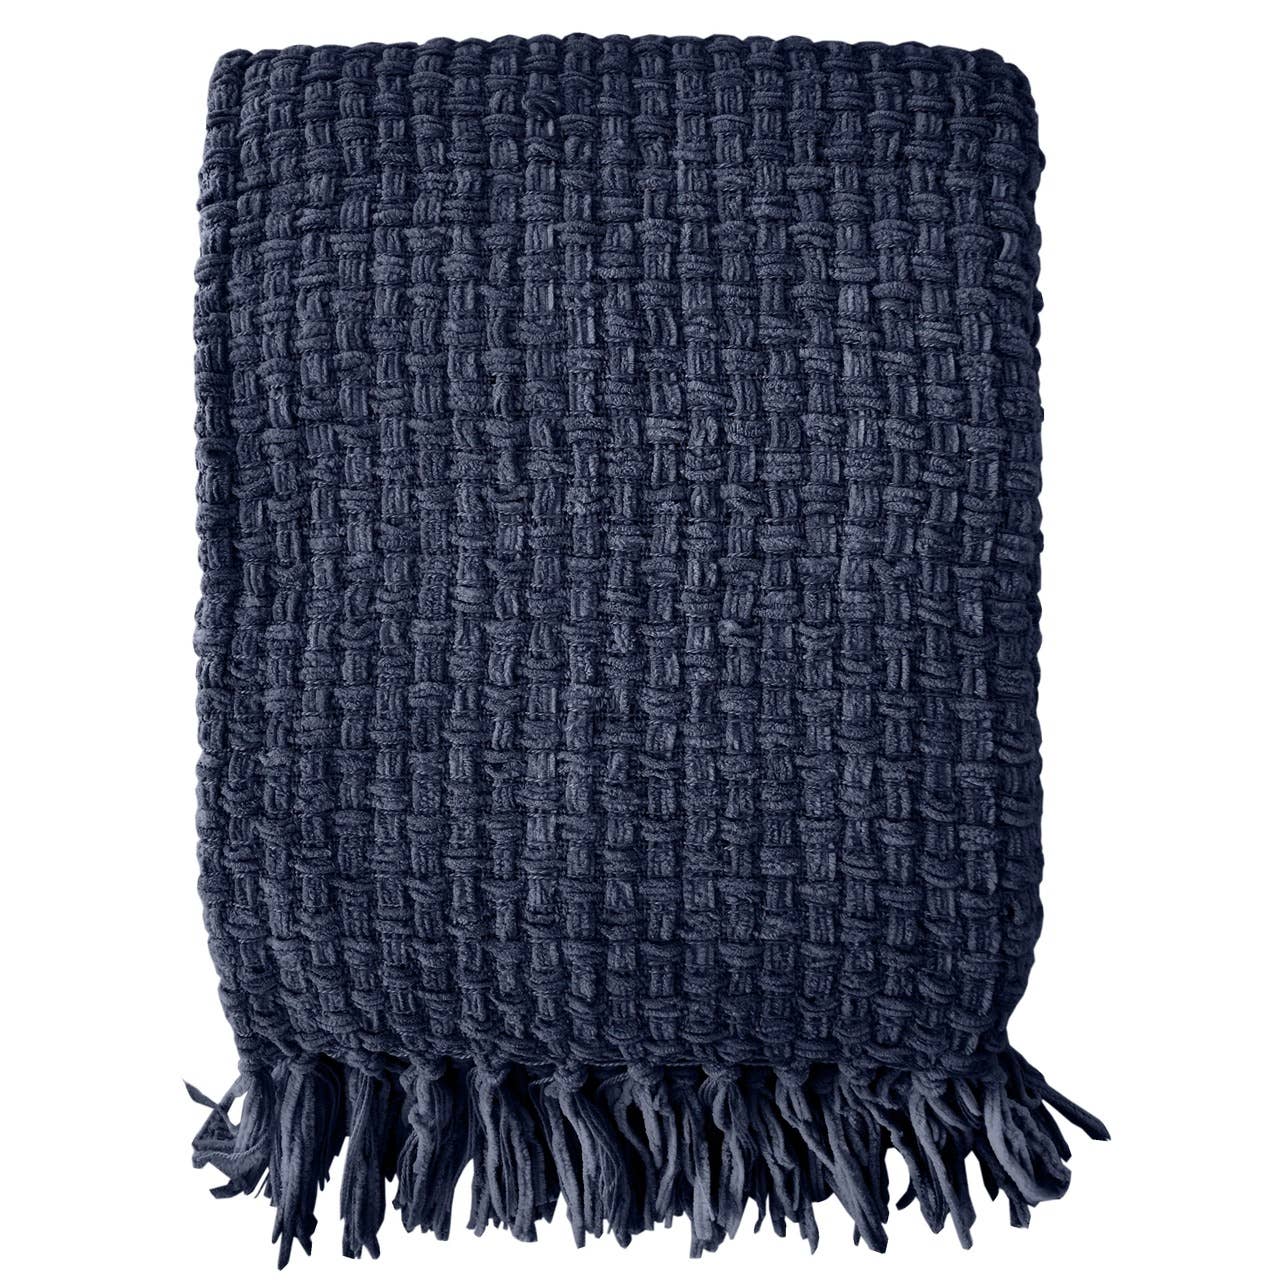 Fabstyles Chenille Basket Weave Navy Throw Blanket, 50x60